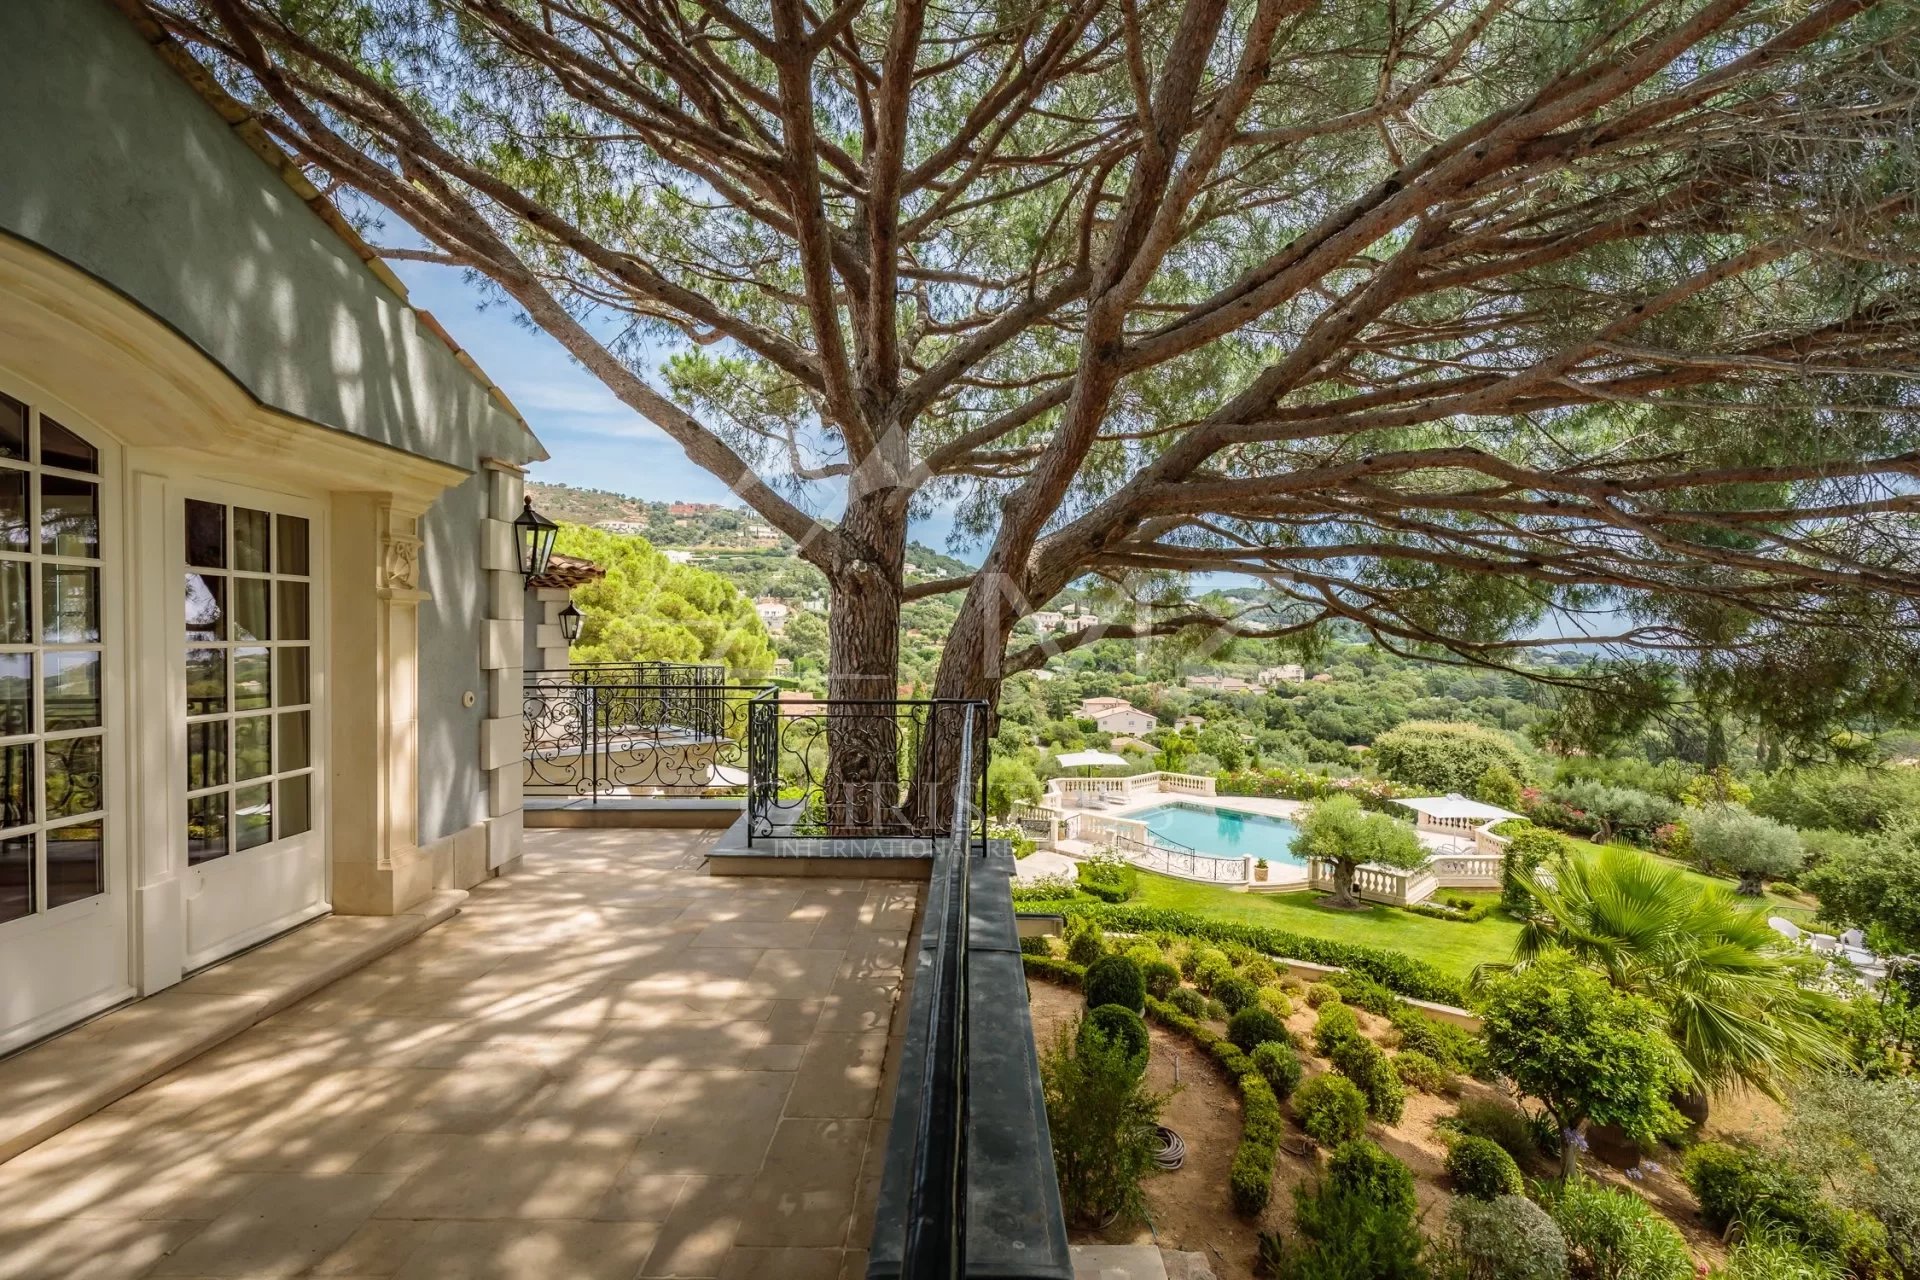 Grimaud - Domain of Beauvallon - Majestic property with sea view